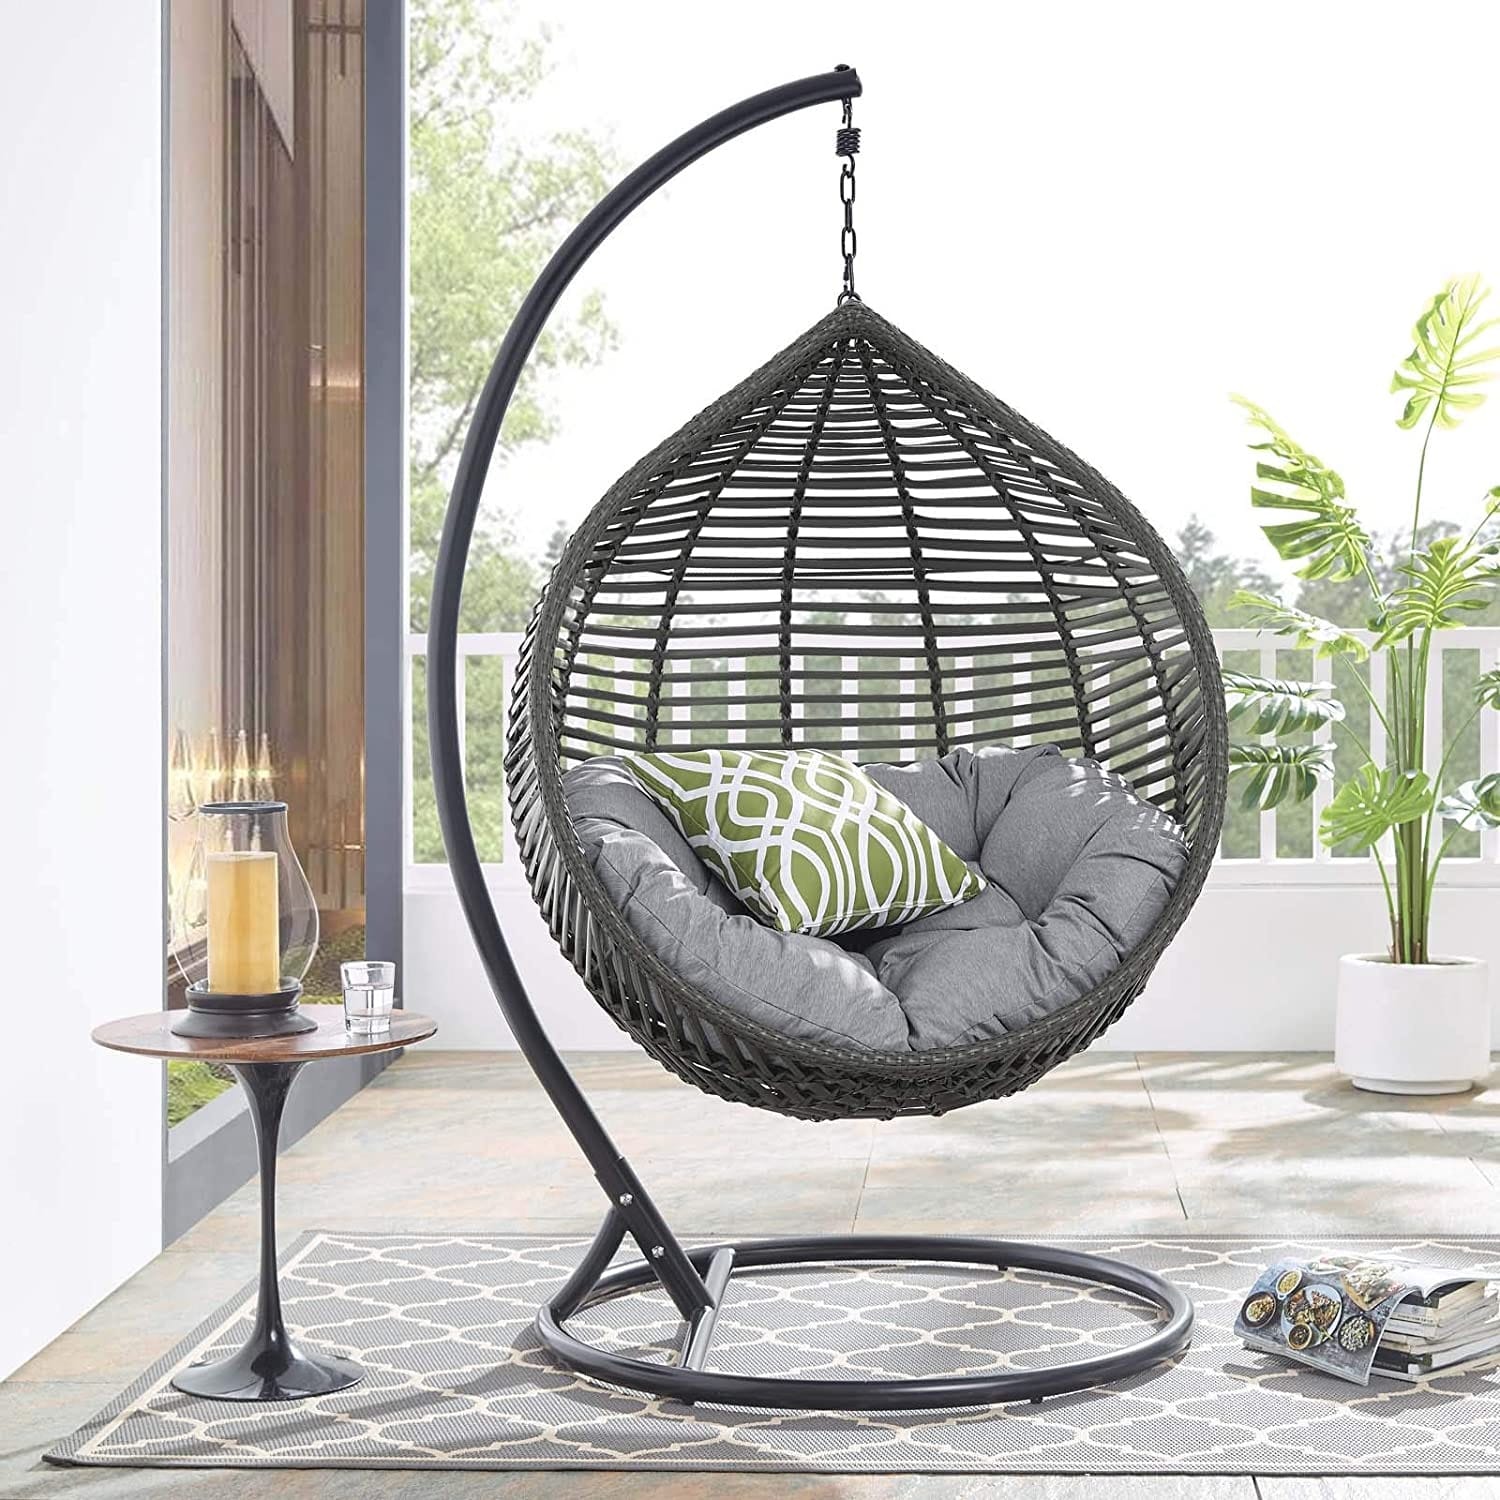 The 10 Best Hanging Papasan Chairs of 2022